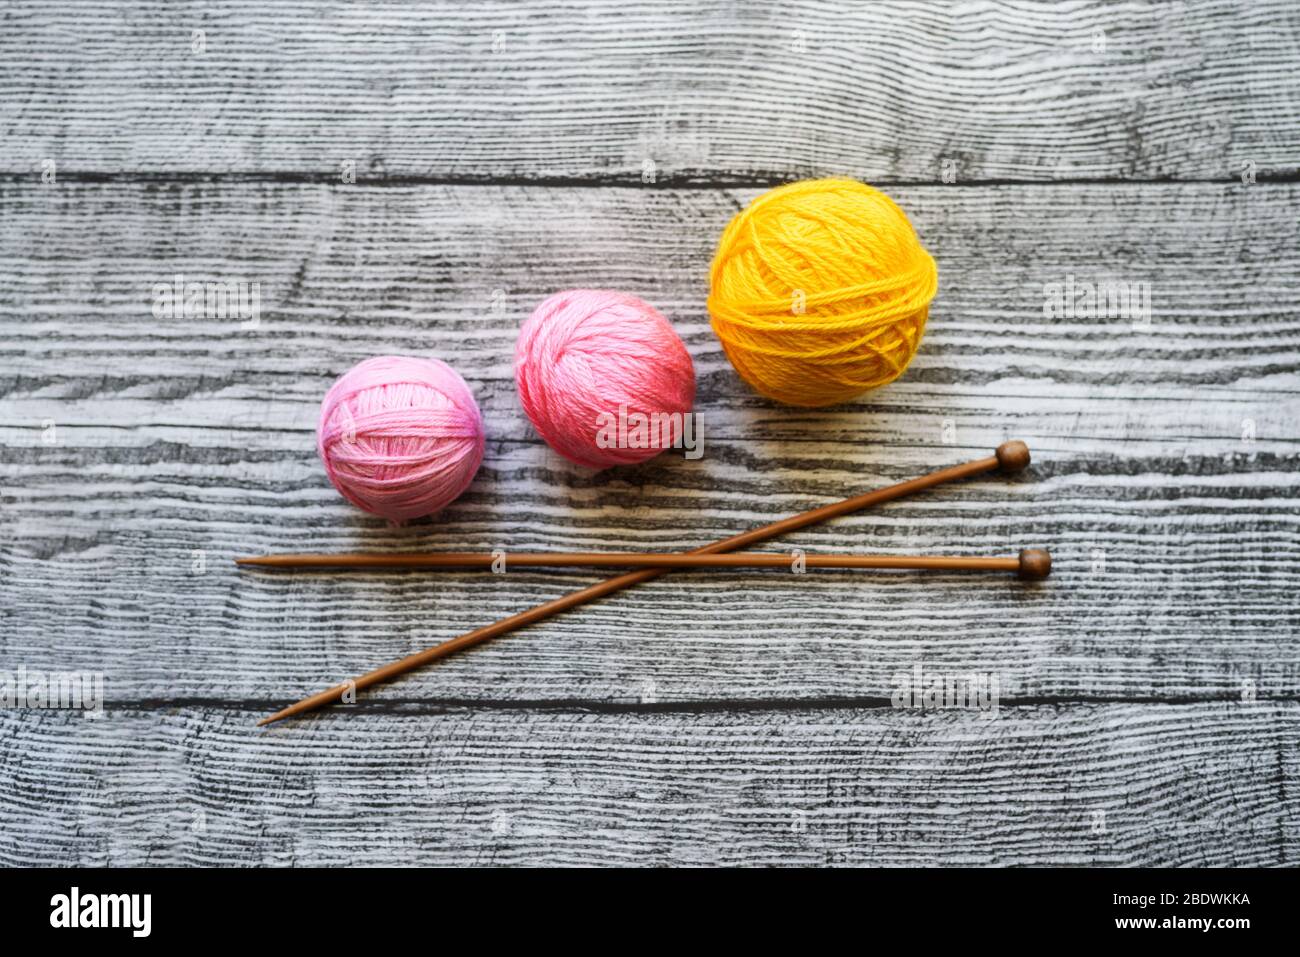 Flat lay of three colored wool balls, knitting needles laying on the wooden background. Stock Photo